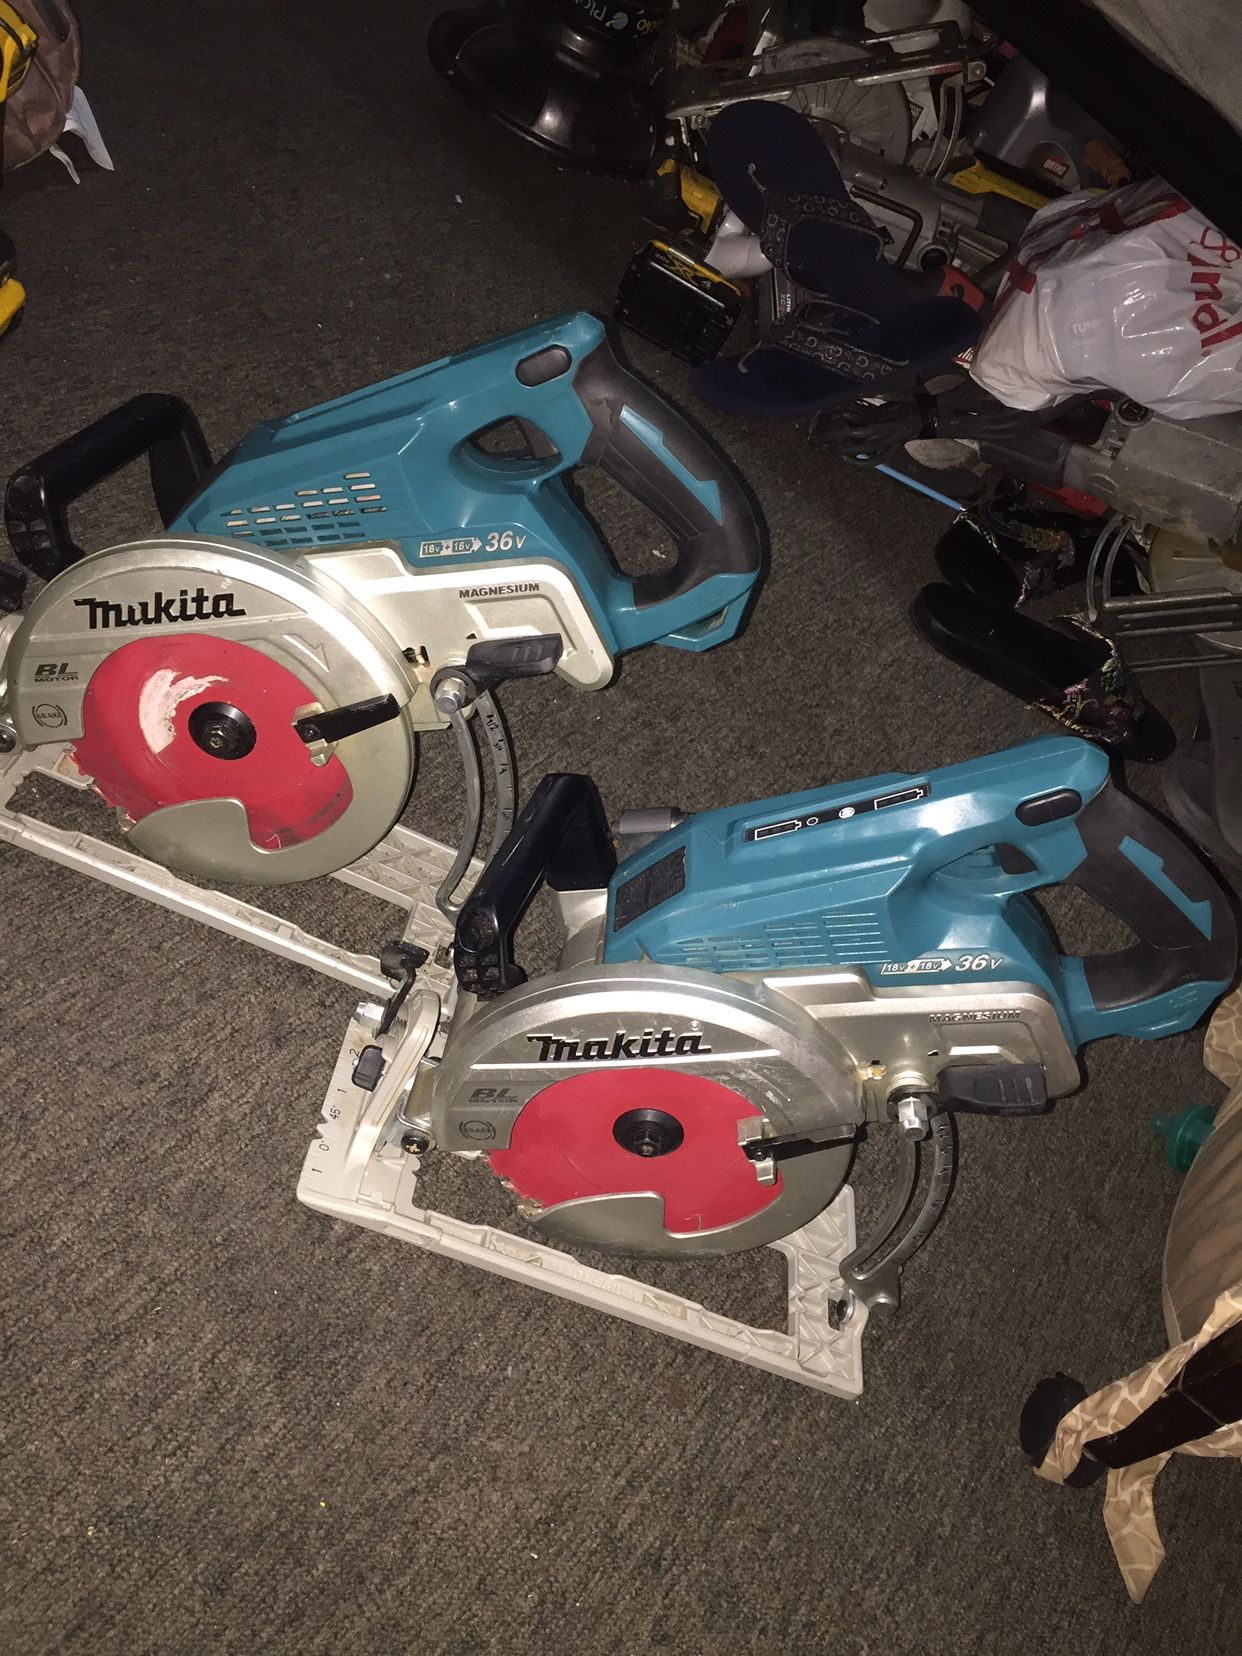 On sale 2 magnesium makita 36 V skilsaw is only tool both for $$$290 dollars or 1 makita skilsaw for $$$155 dollars firm price i have in oakland not